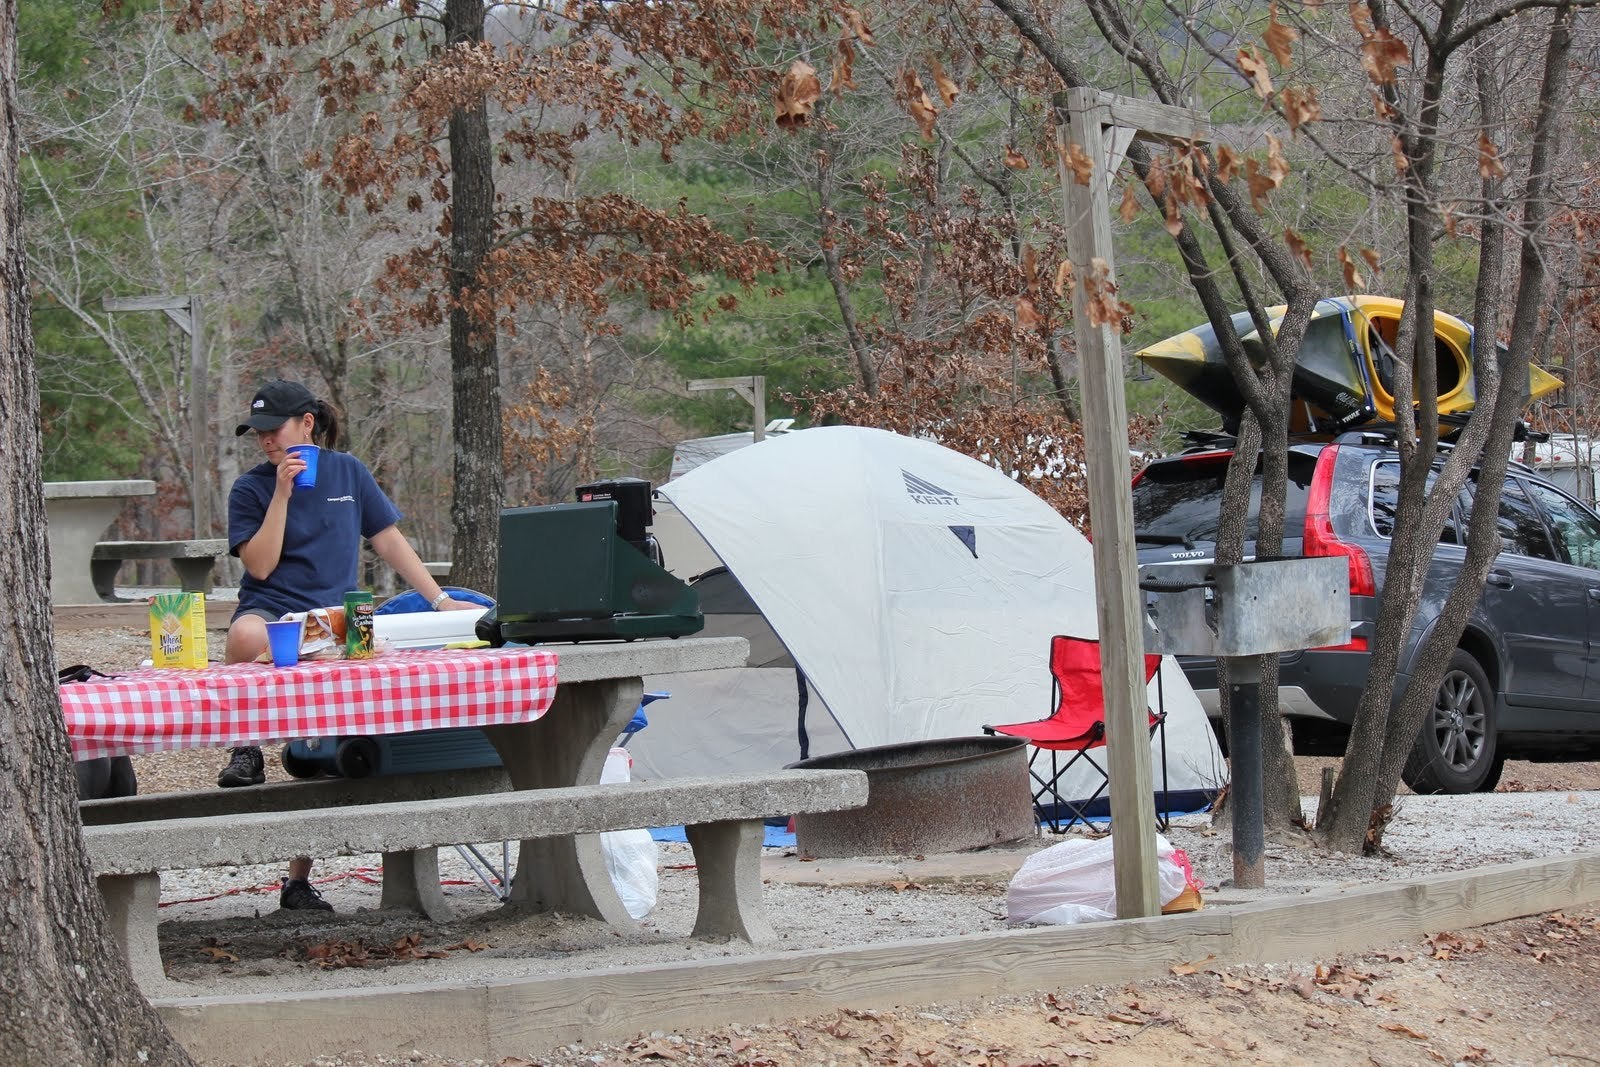 Camper submitted image from Tallulah Gorge State Park - 5